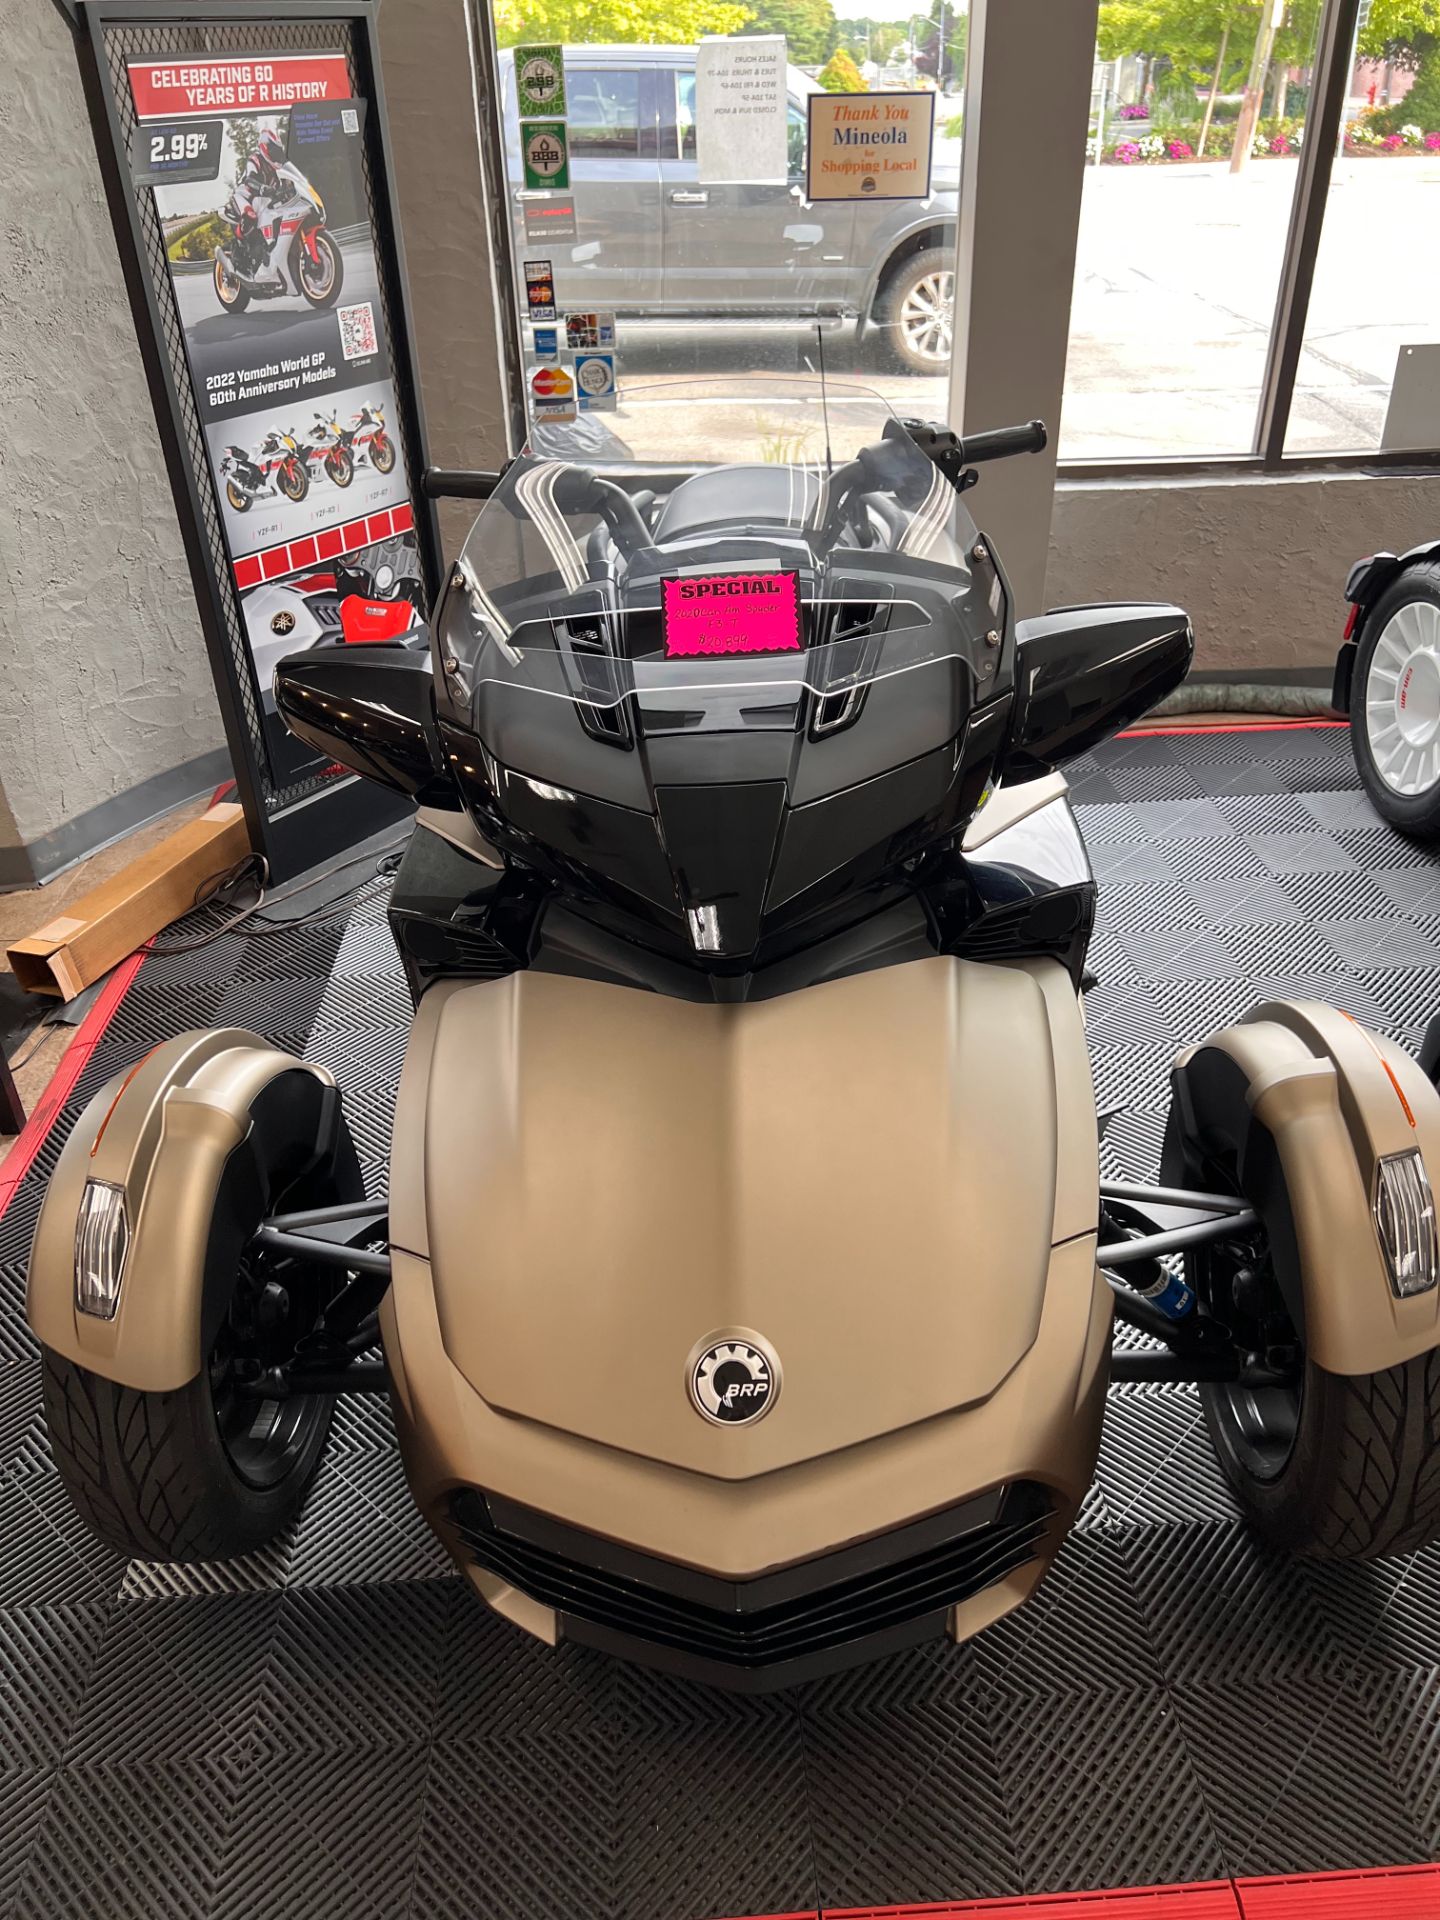 2020 Can-Am Spyder F3-T in Mineola, New York - Photo 4